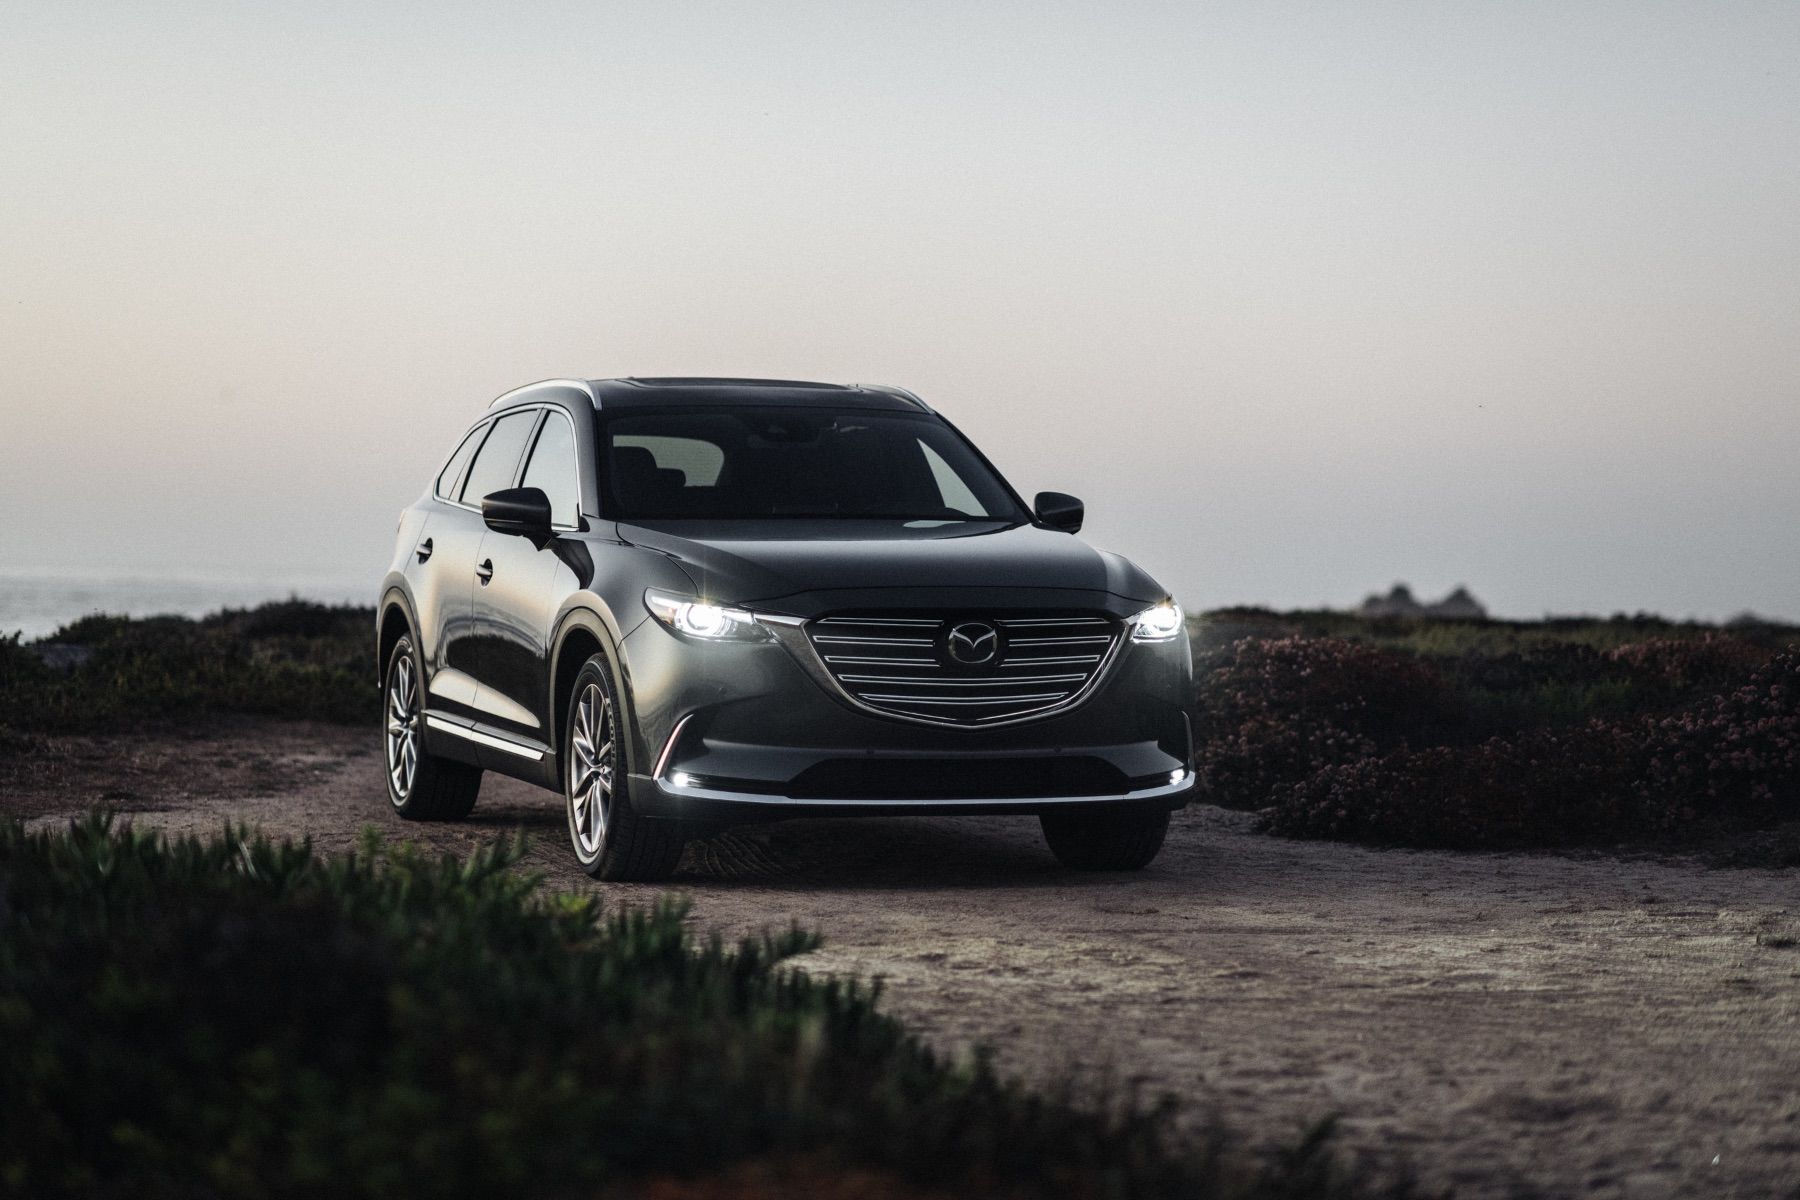 2020 Mazda CX-9 Is More Luxurious, Safer, And More Powerful